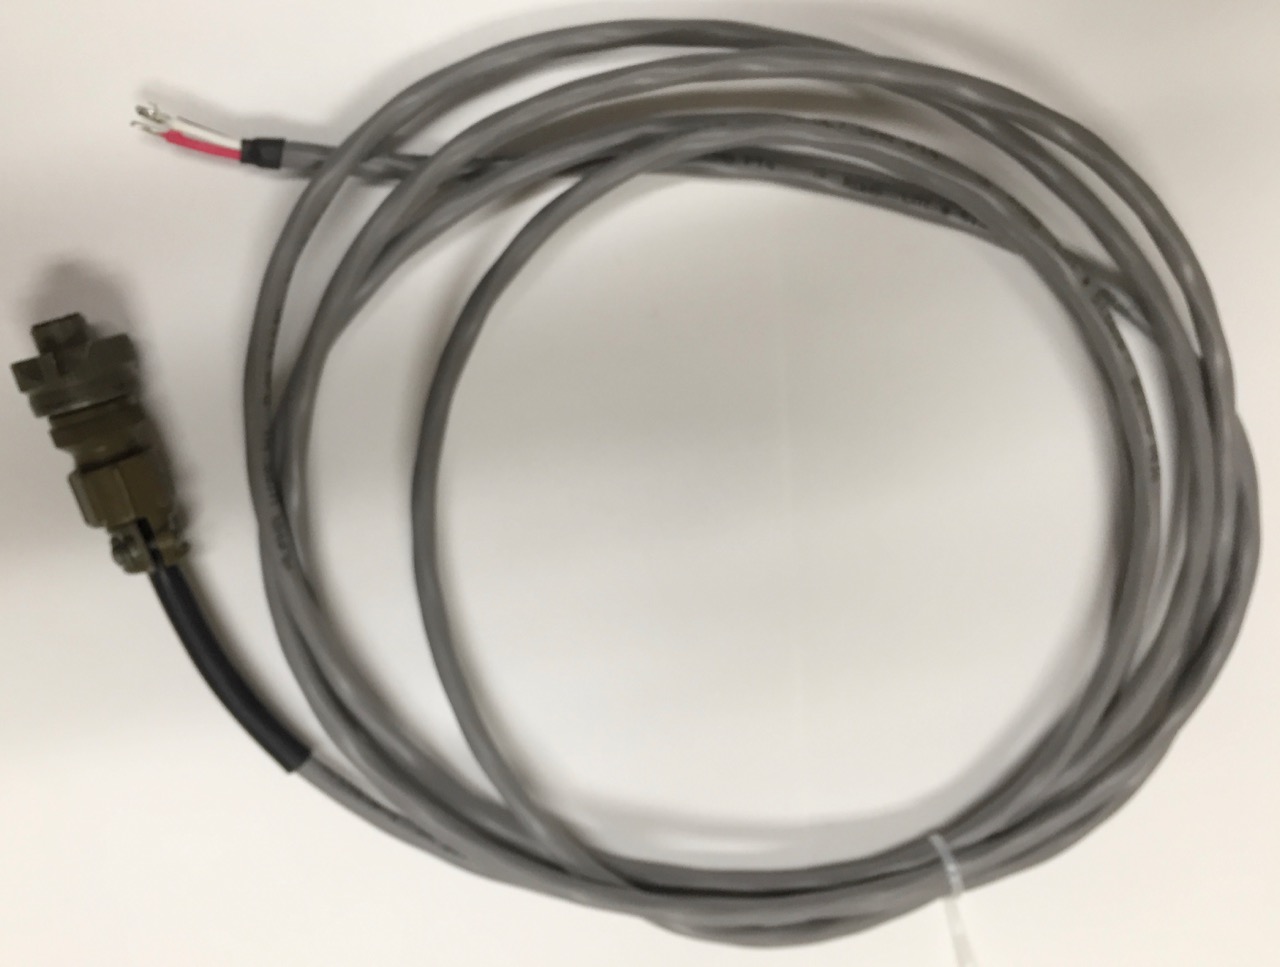 TI 10’ Cable Assembly with Amphenol 3-pin Connector (10500-01)